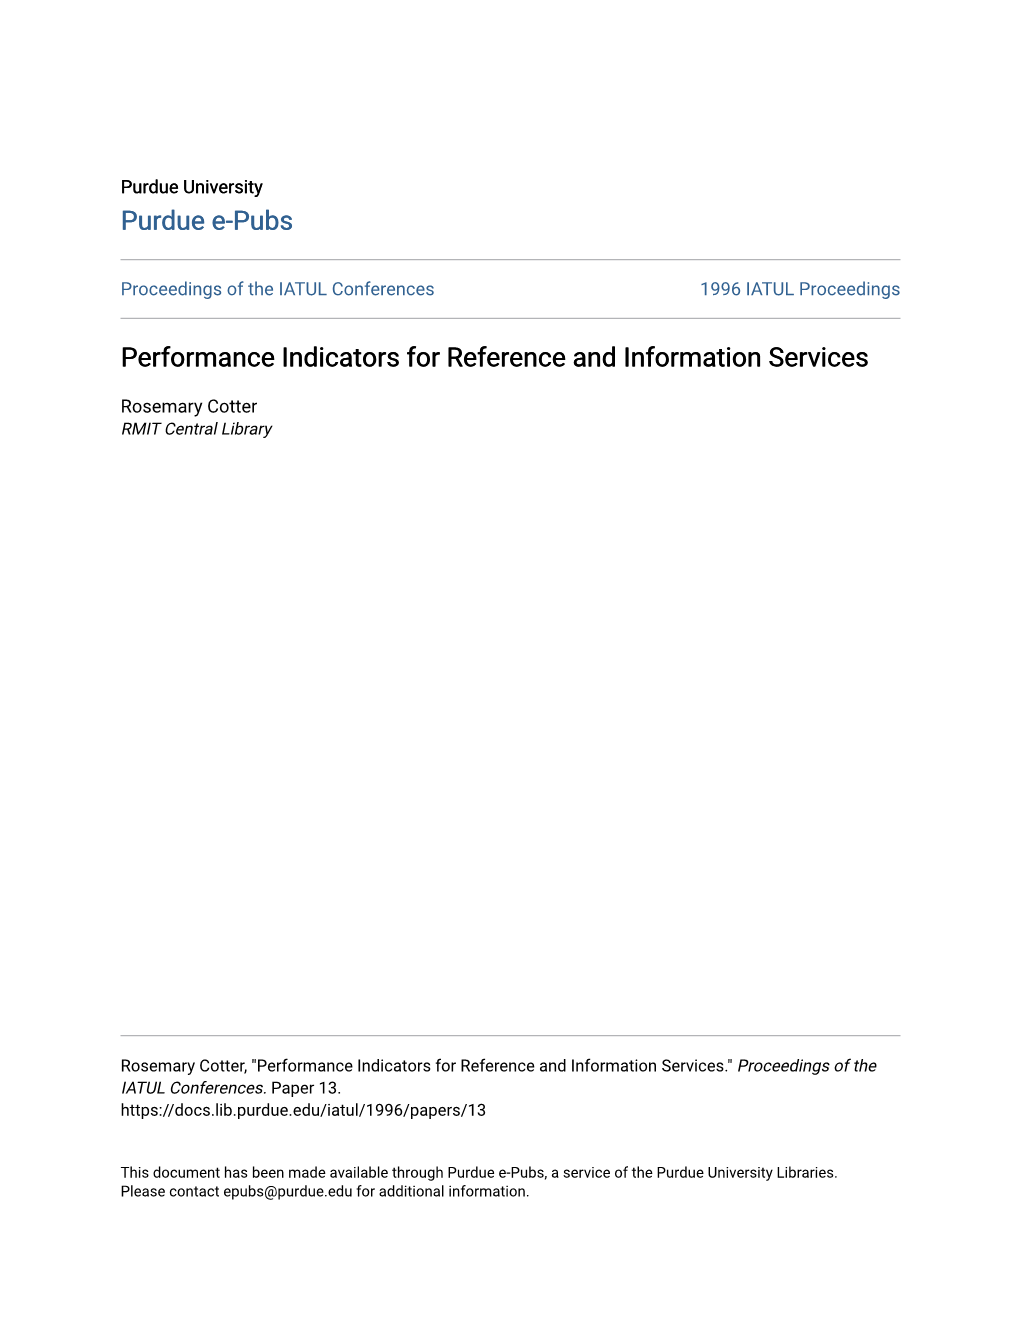 Performance Indicators for Reference and Information Services